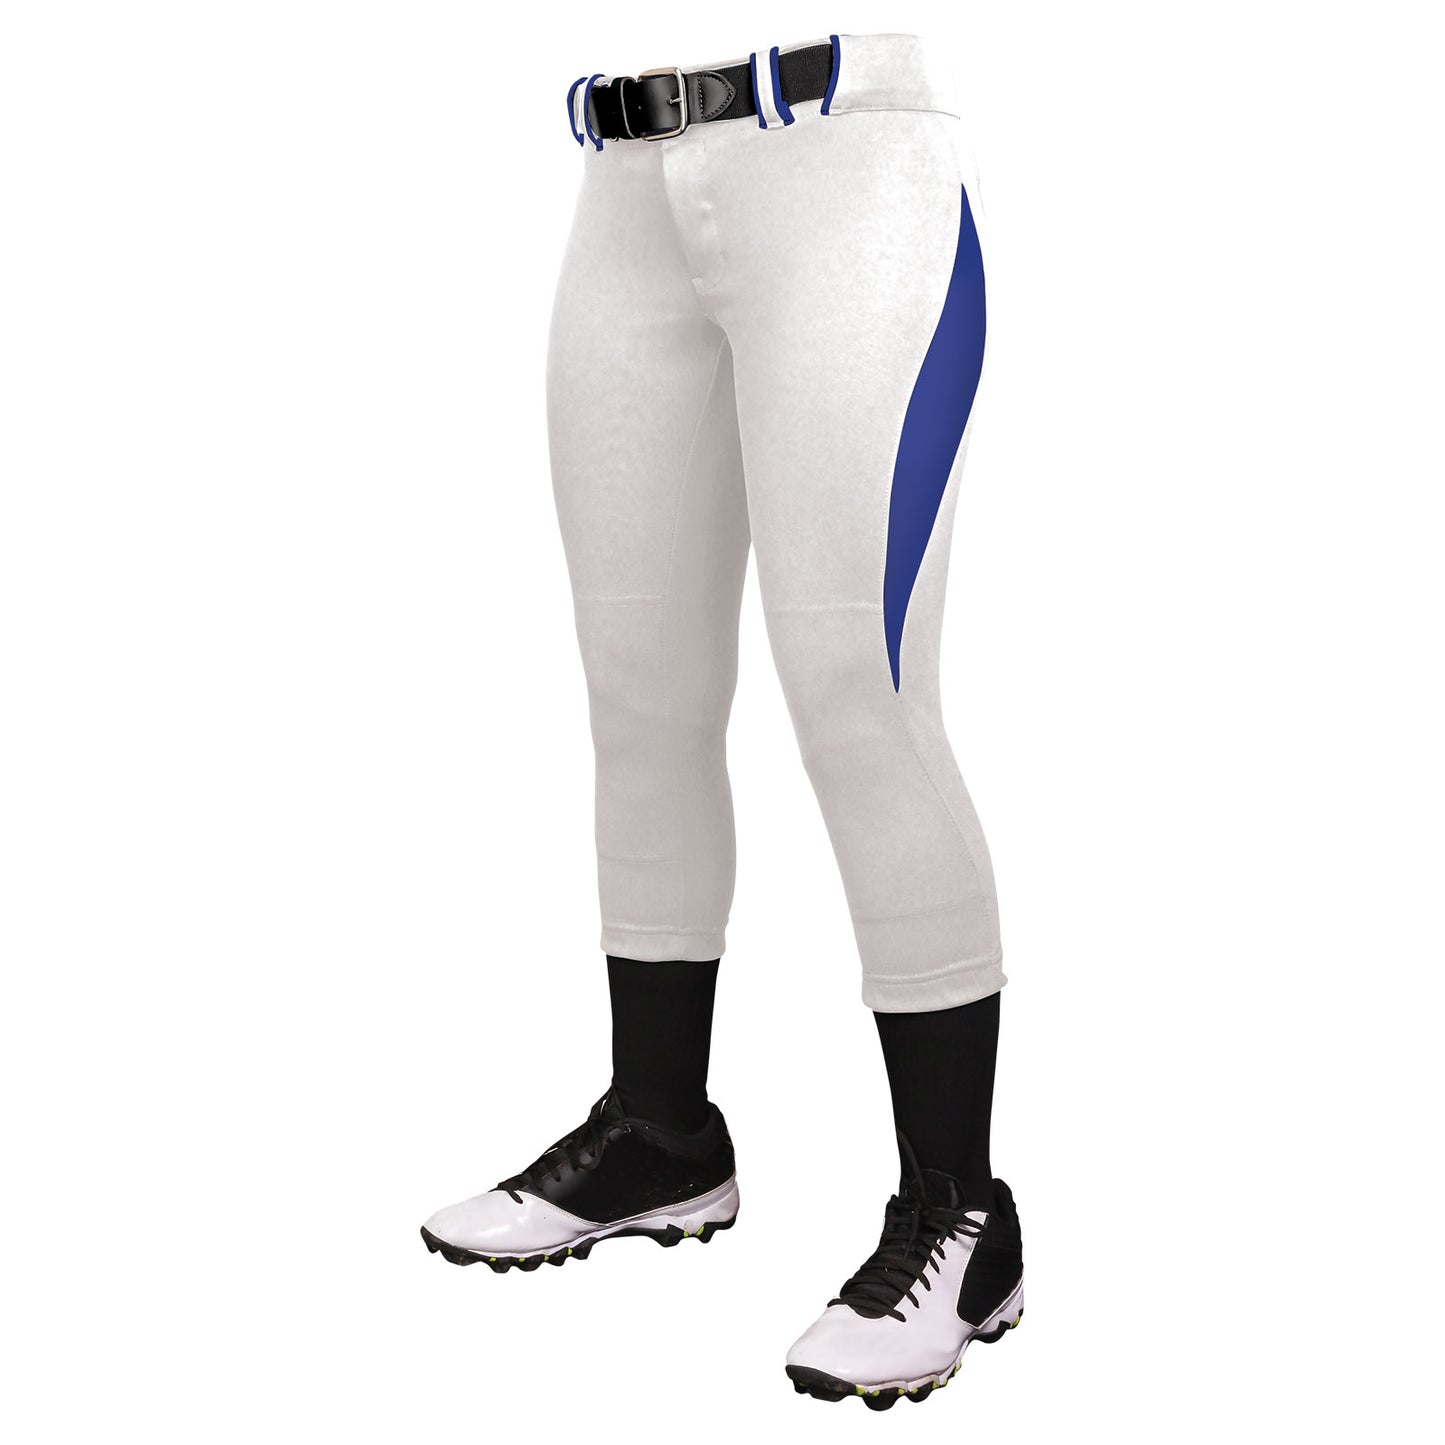 BP28- ED WARRIORS SURGE TRADITIONAL STYLE LOW RISE PANT